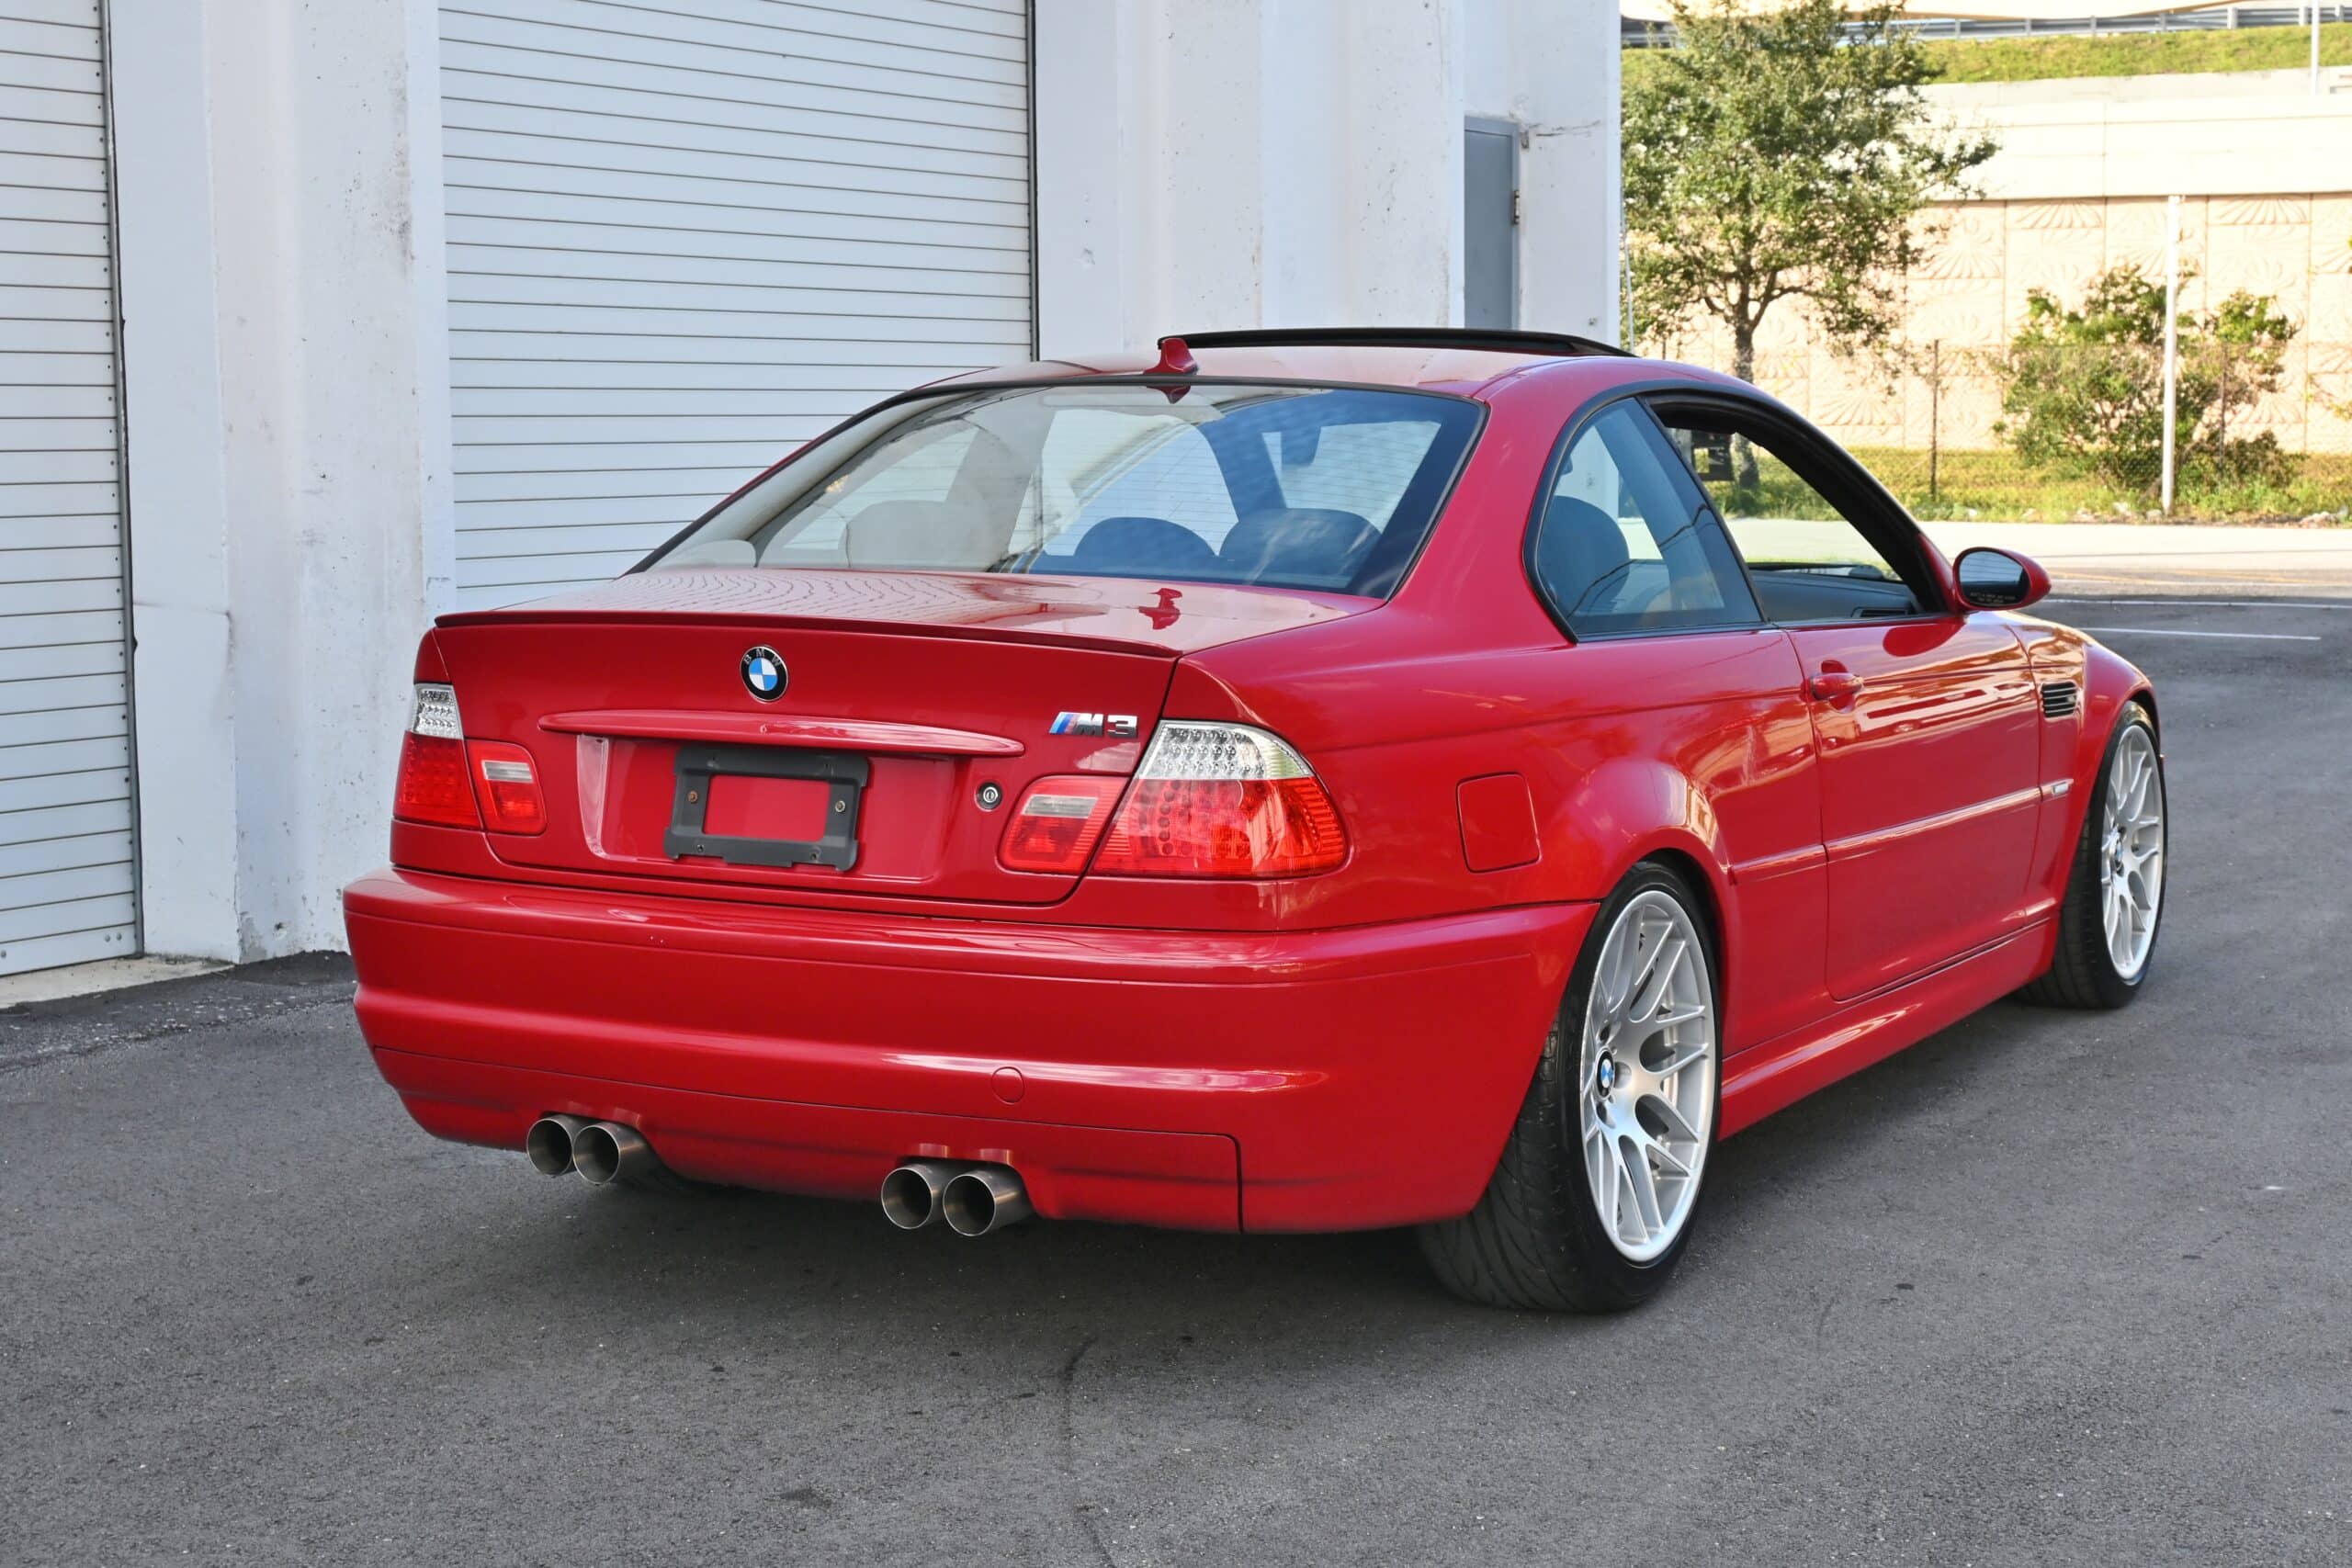 2005 BMW M3 E46 6 Speed Manual Imola Red/ OEM ZCP Wheels / 88K Miles / Enthusiast Owned -Meticulously Maintained